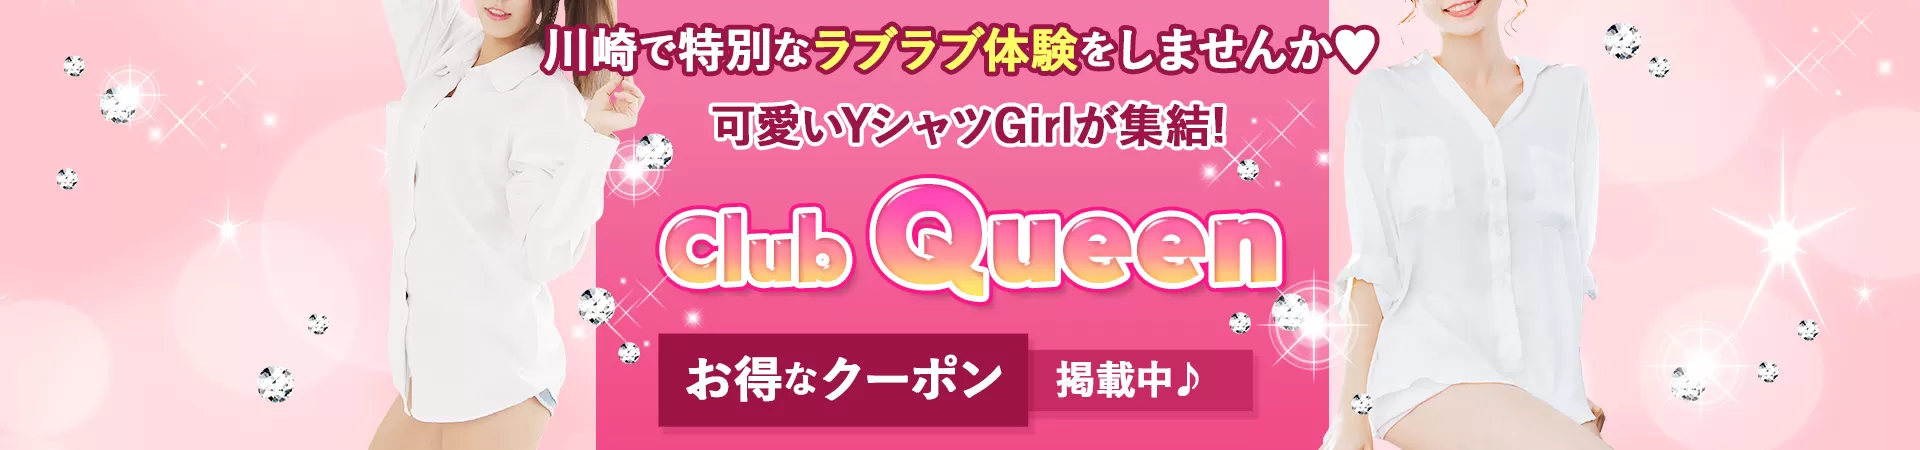 Club Queen(クラブクィーン)